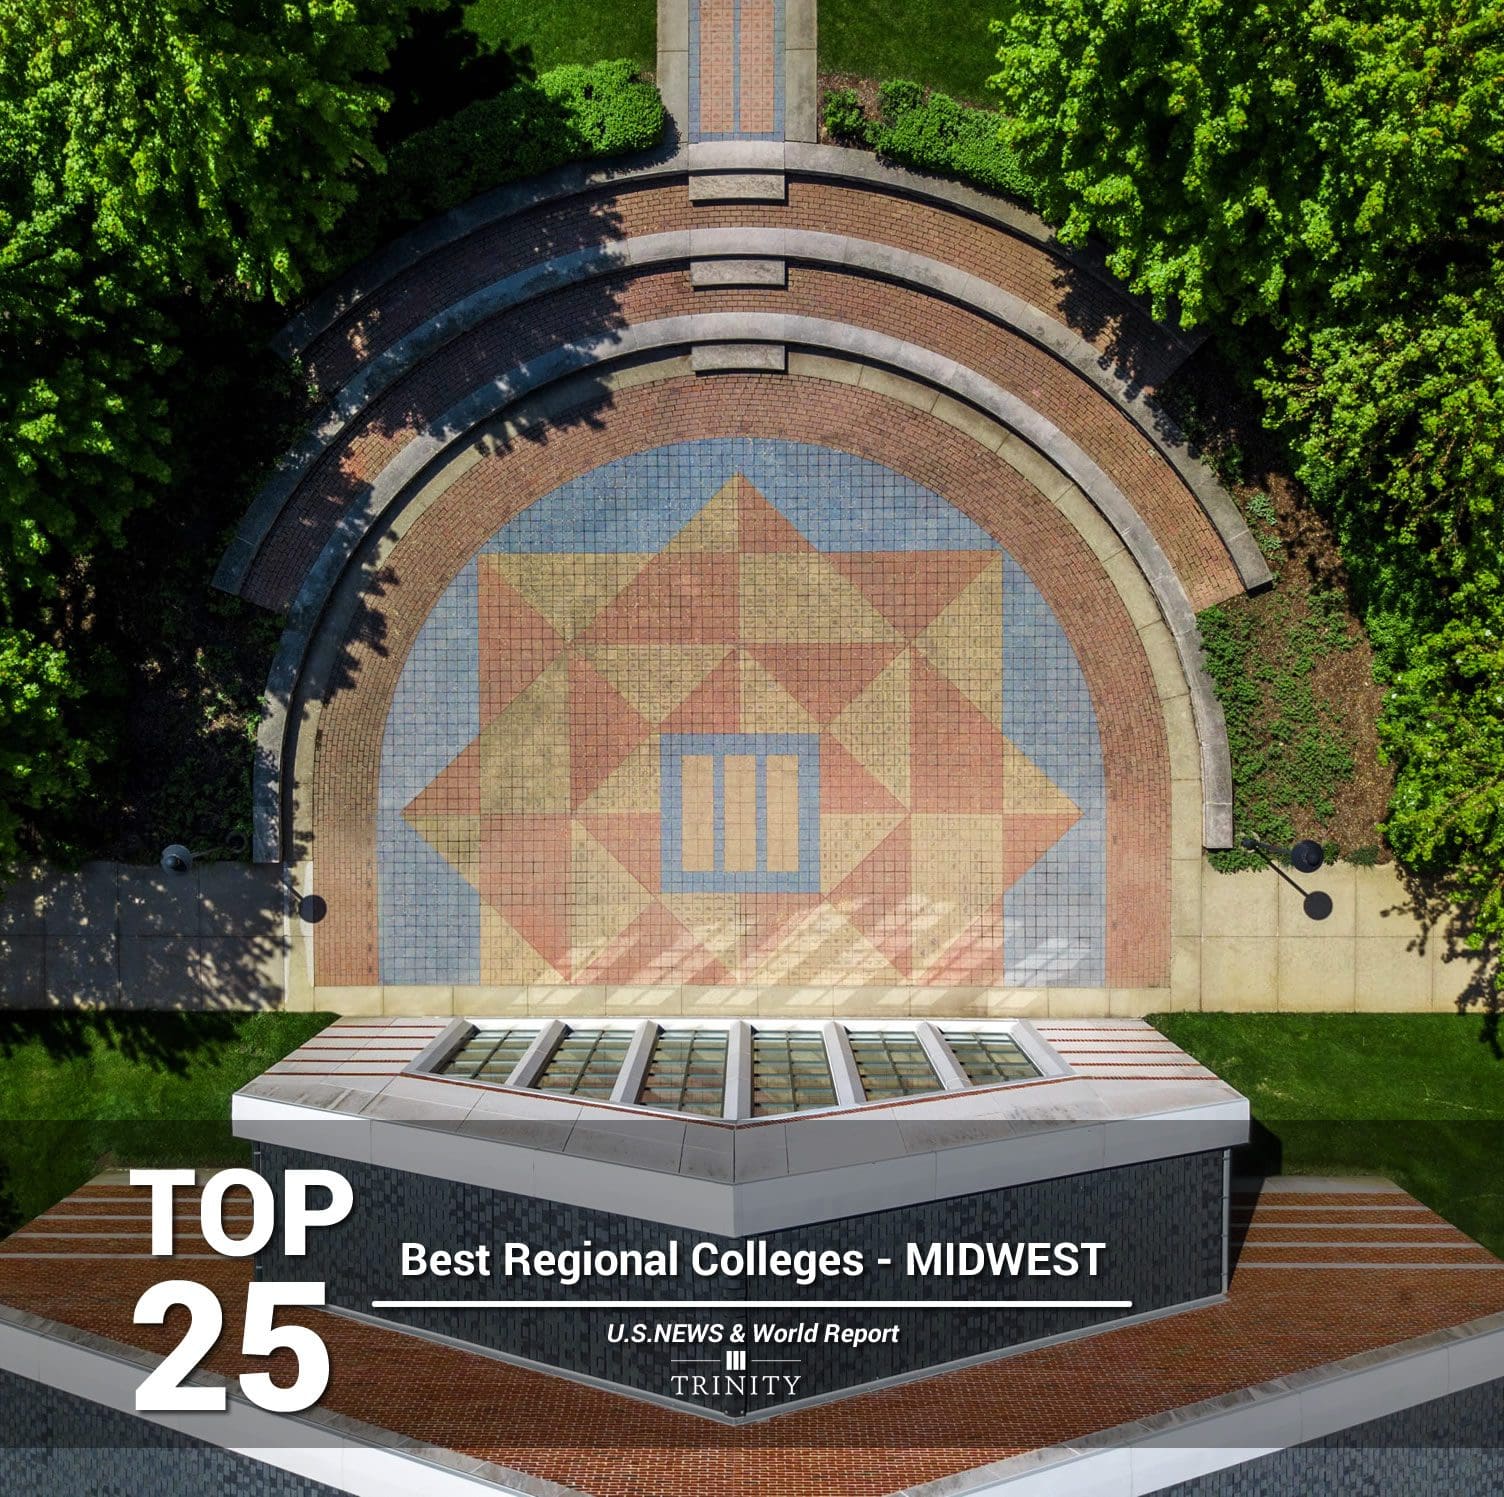 Top 25 - Best Regional Colleges - Midwest U.S. News & World Report